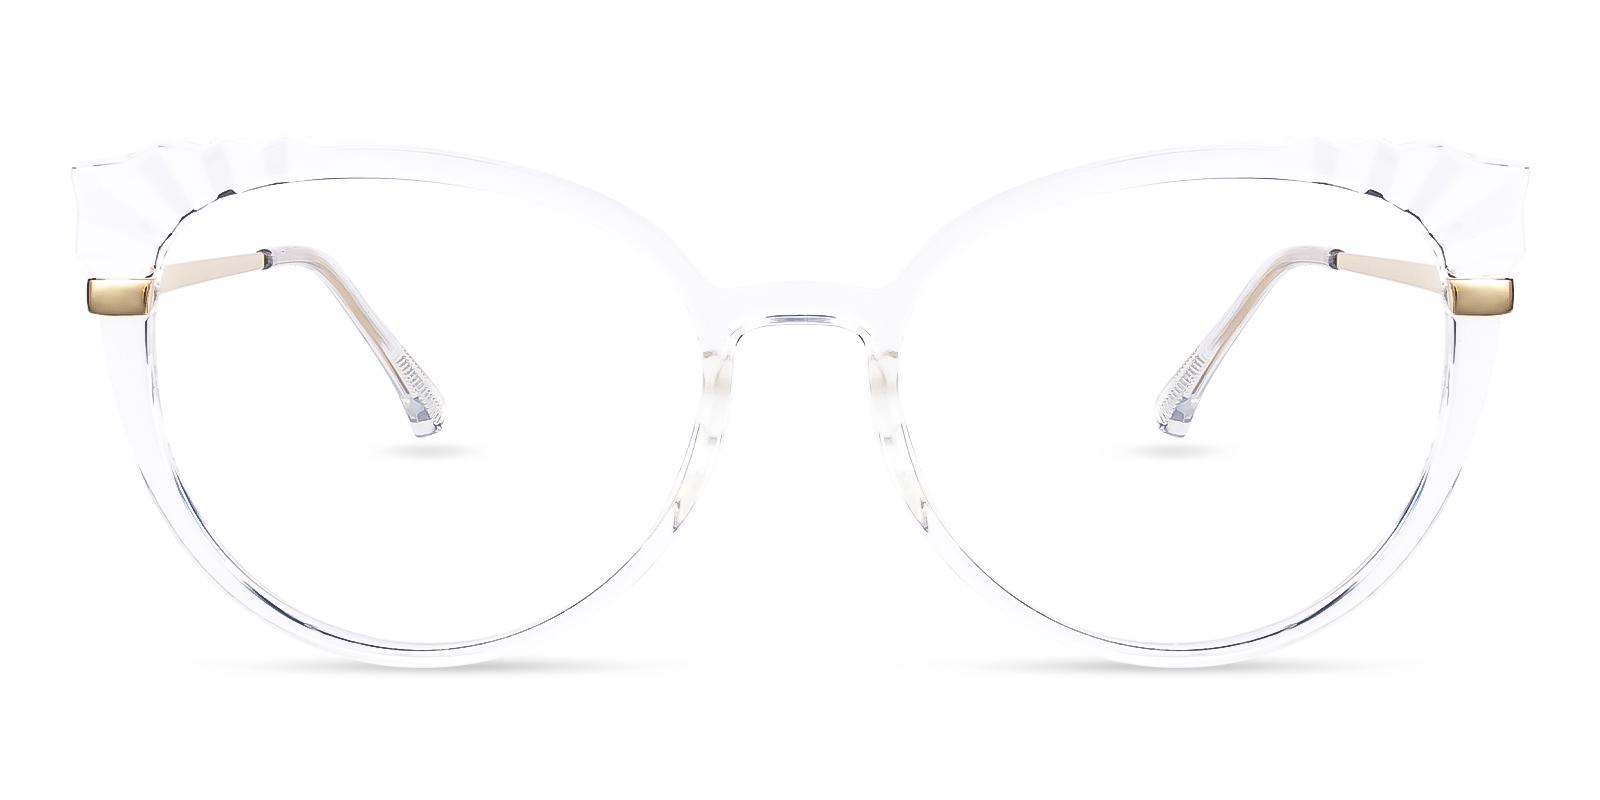 Iconic Fclear Combination Eyeglasses , Fashion , SpringHinges , UniversalBridgeFit Frames from ABBE Glasses